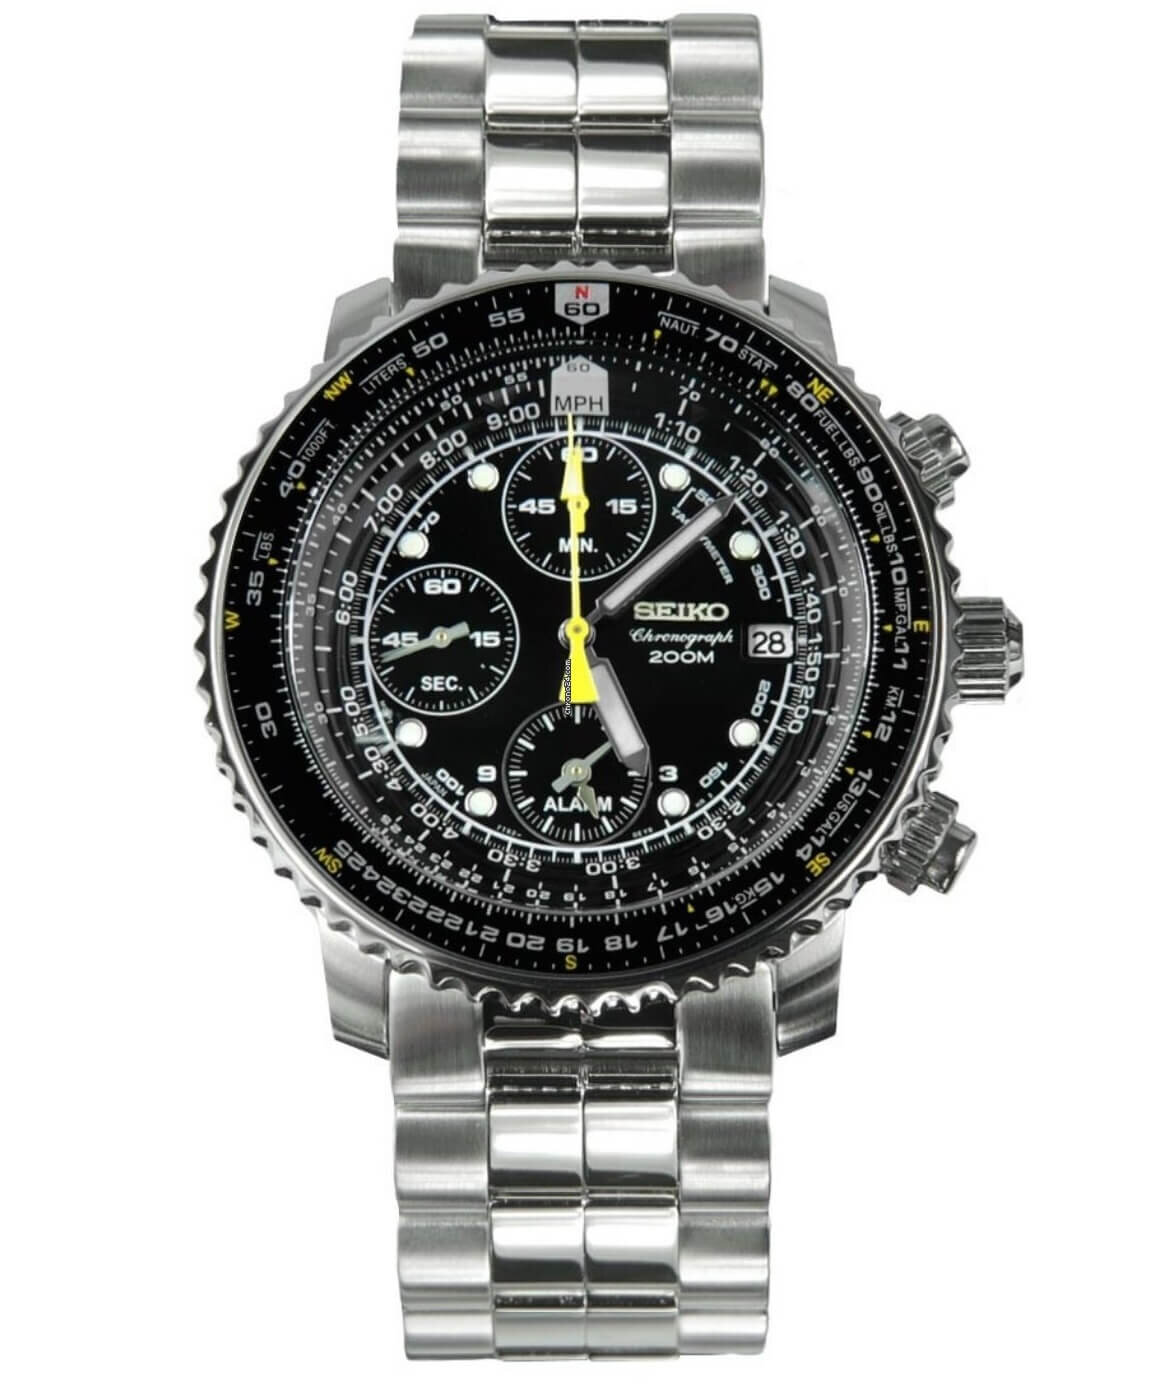 10 Breitling Navitimer Homage Watches – The Aviation King For Less — Ben's  Watch Club